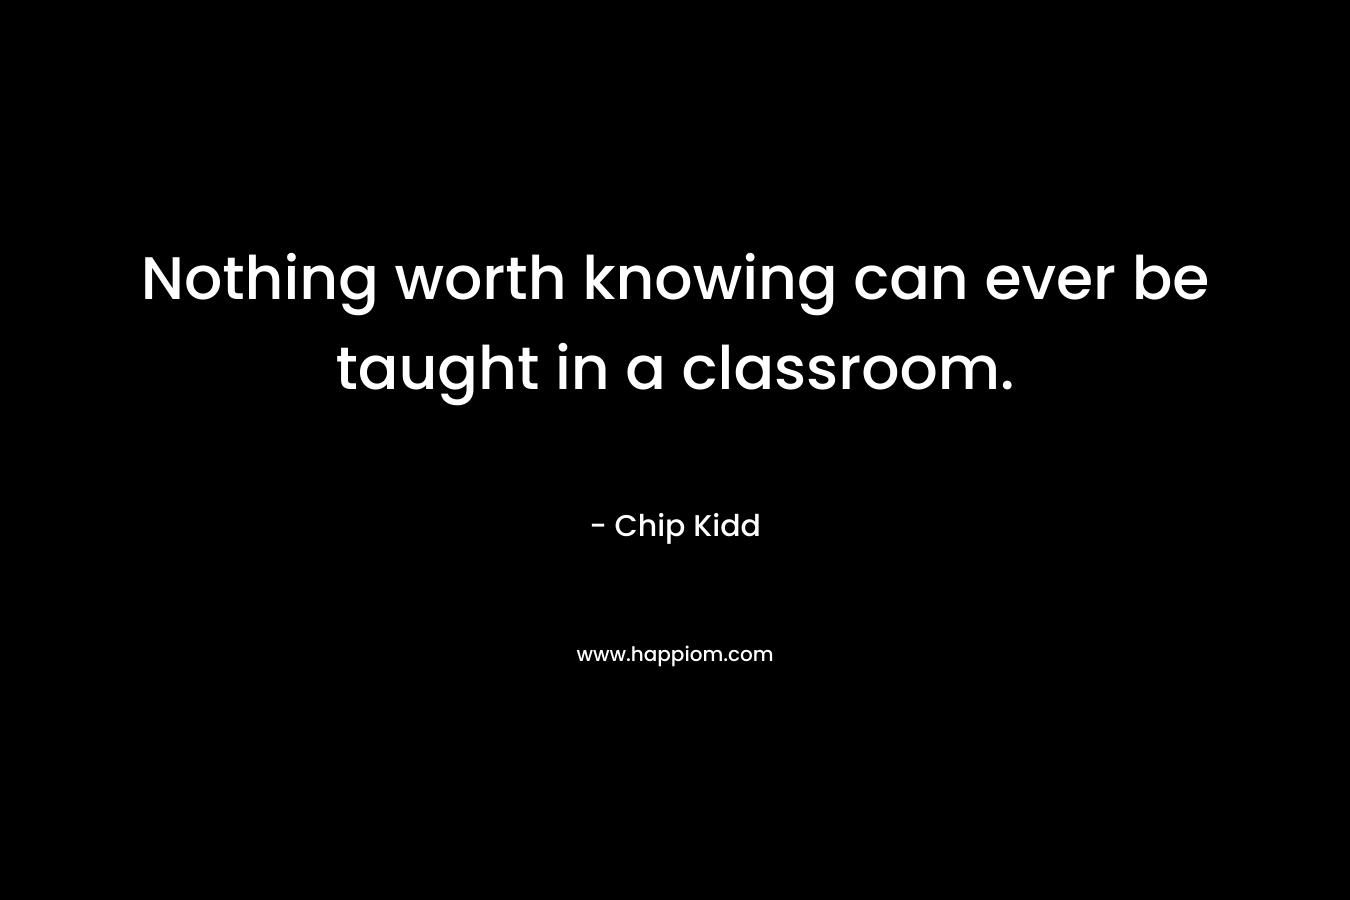 Nothing worth knowing can ever be taught in a classroom. – Chip Kidd